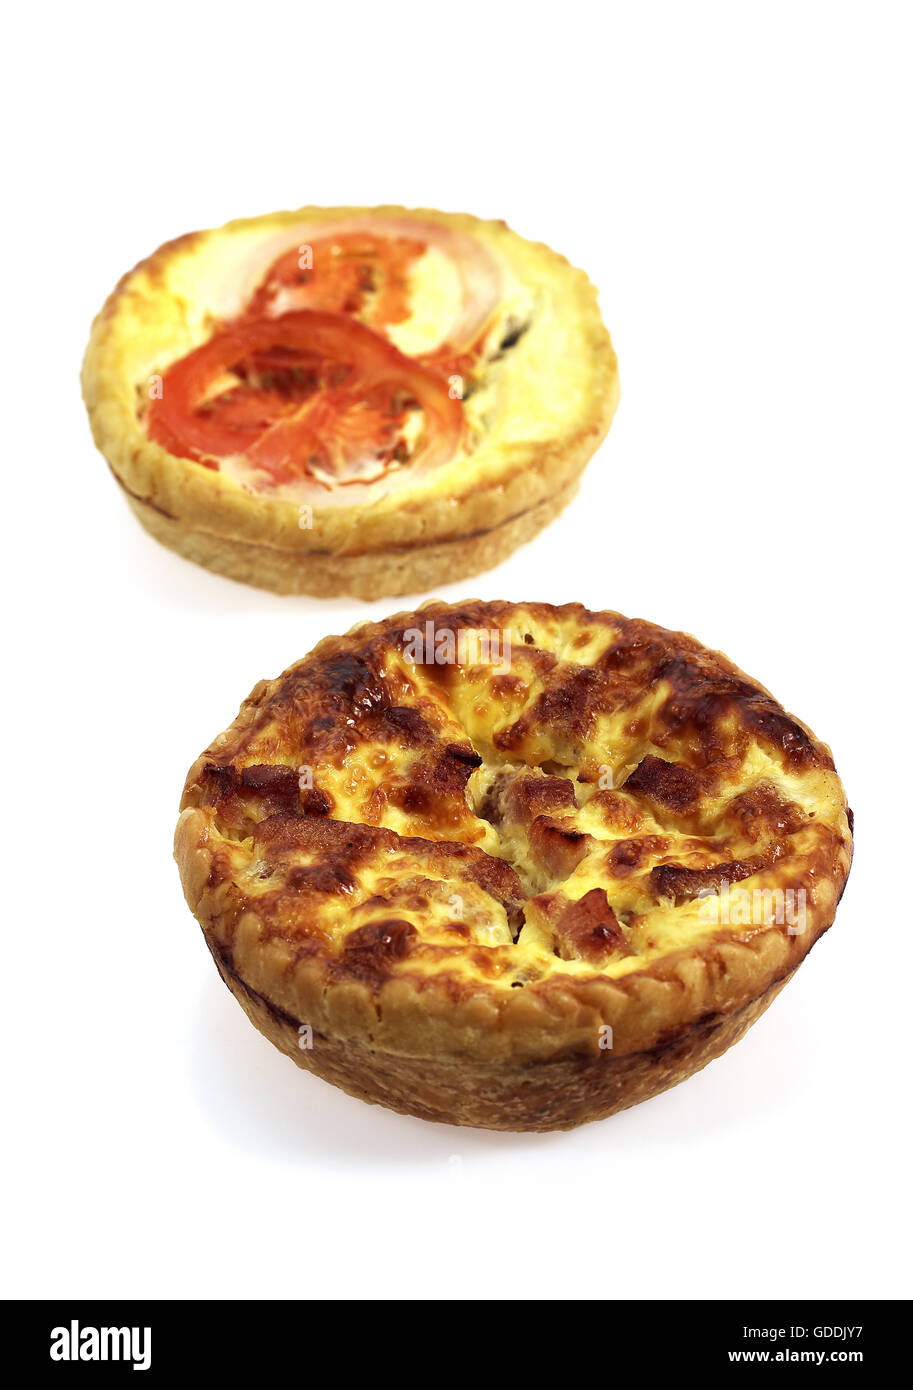 Leek Quiche and Tuna Quiche with Tomatoe against White Background Stock Photo